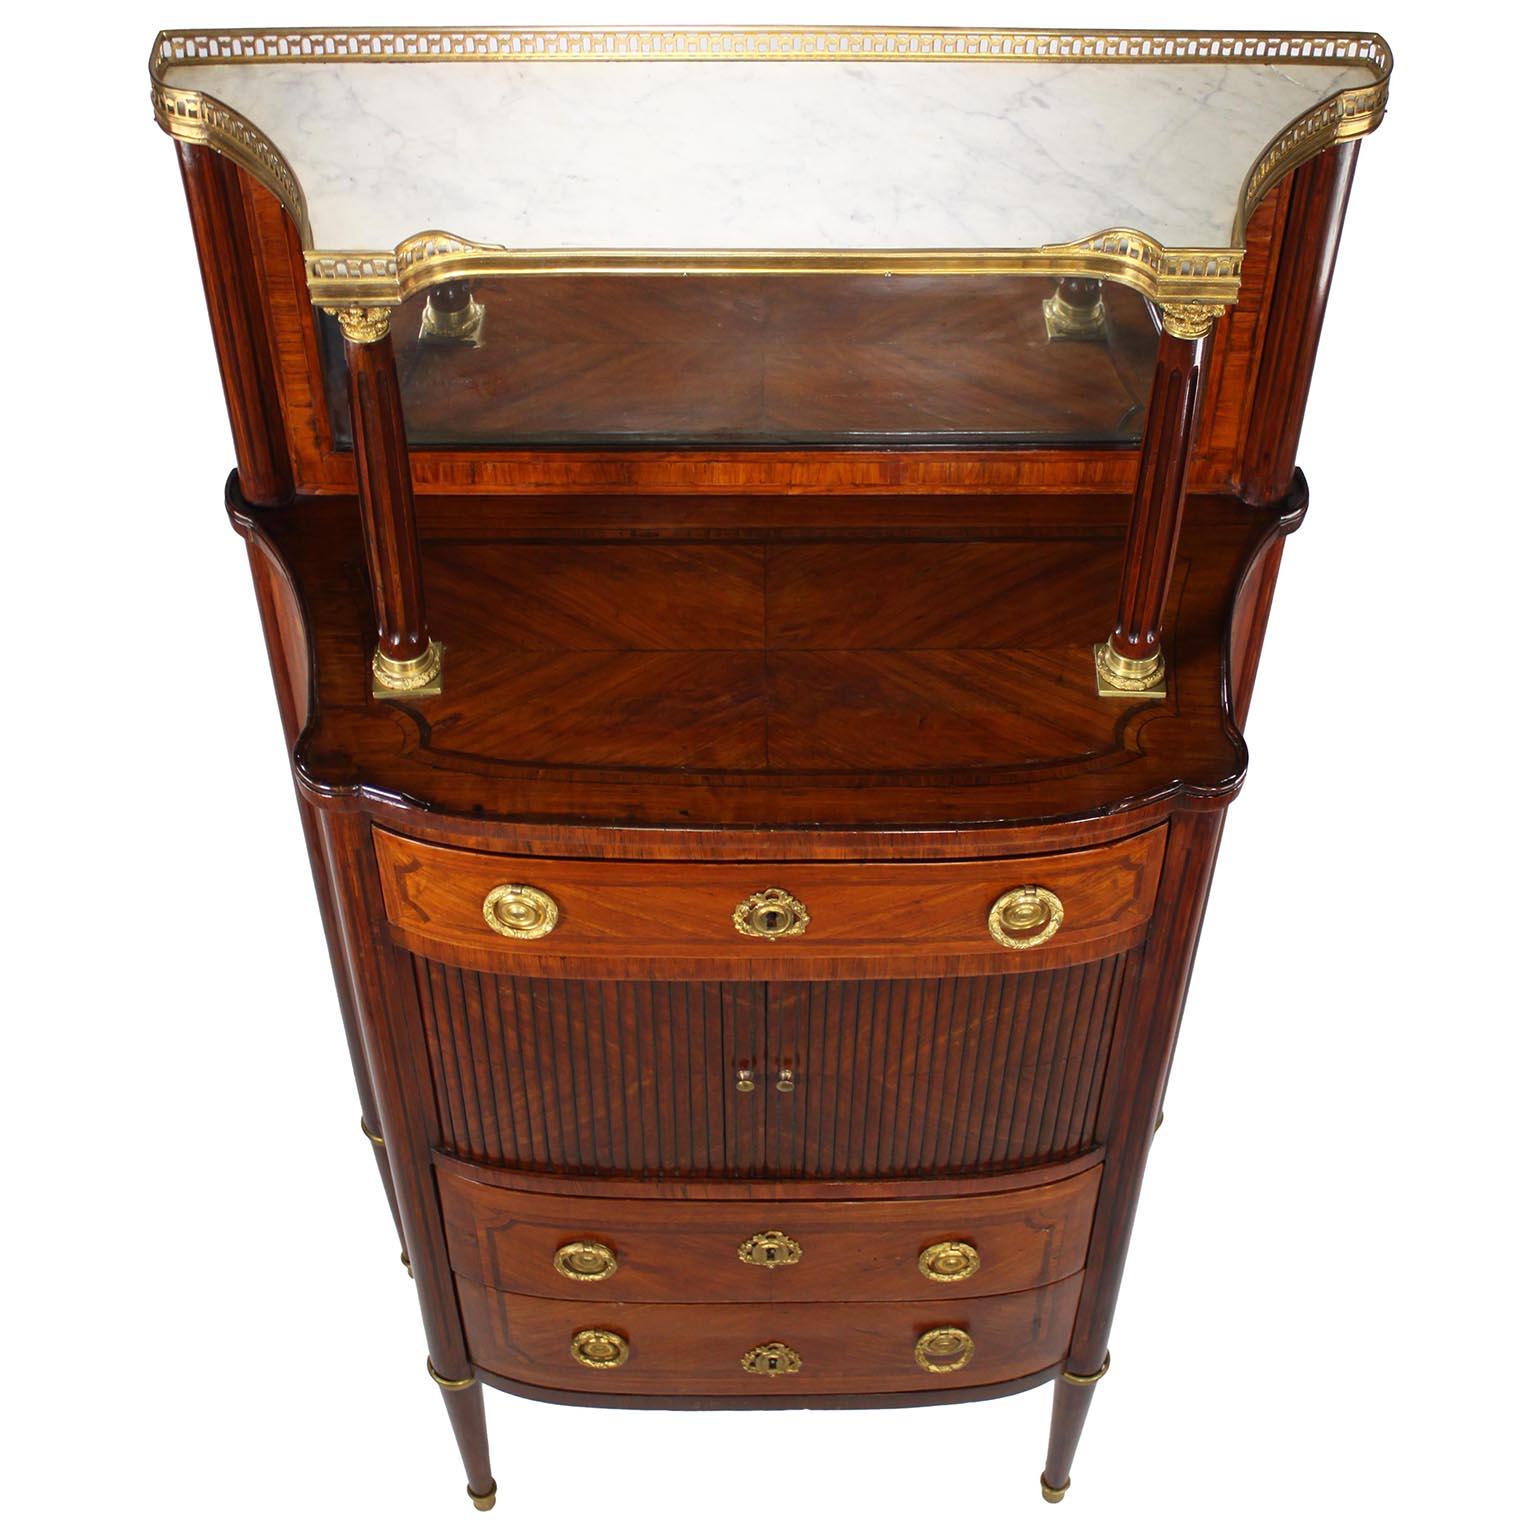 A French 19th Century Louis XVI Style Gilt-Bronze Mounted Meuble d'Appui Cabinet For Sale 1